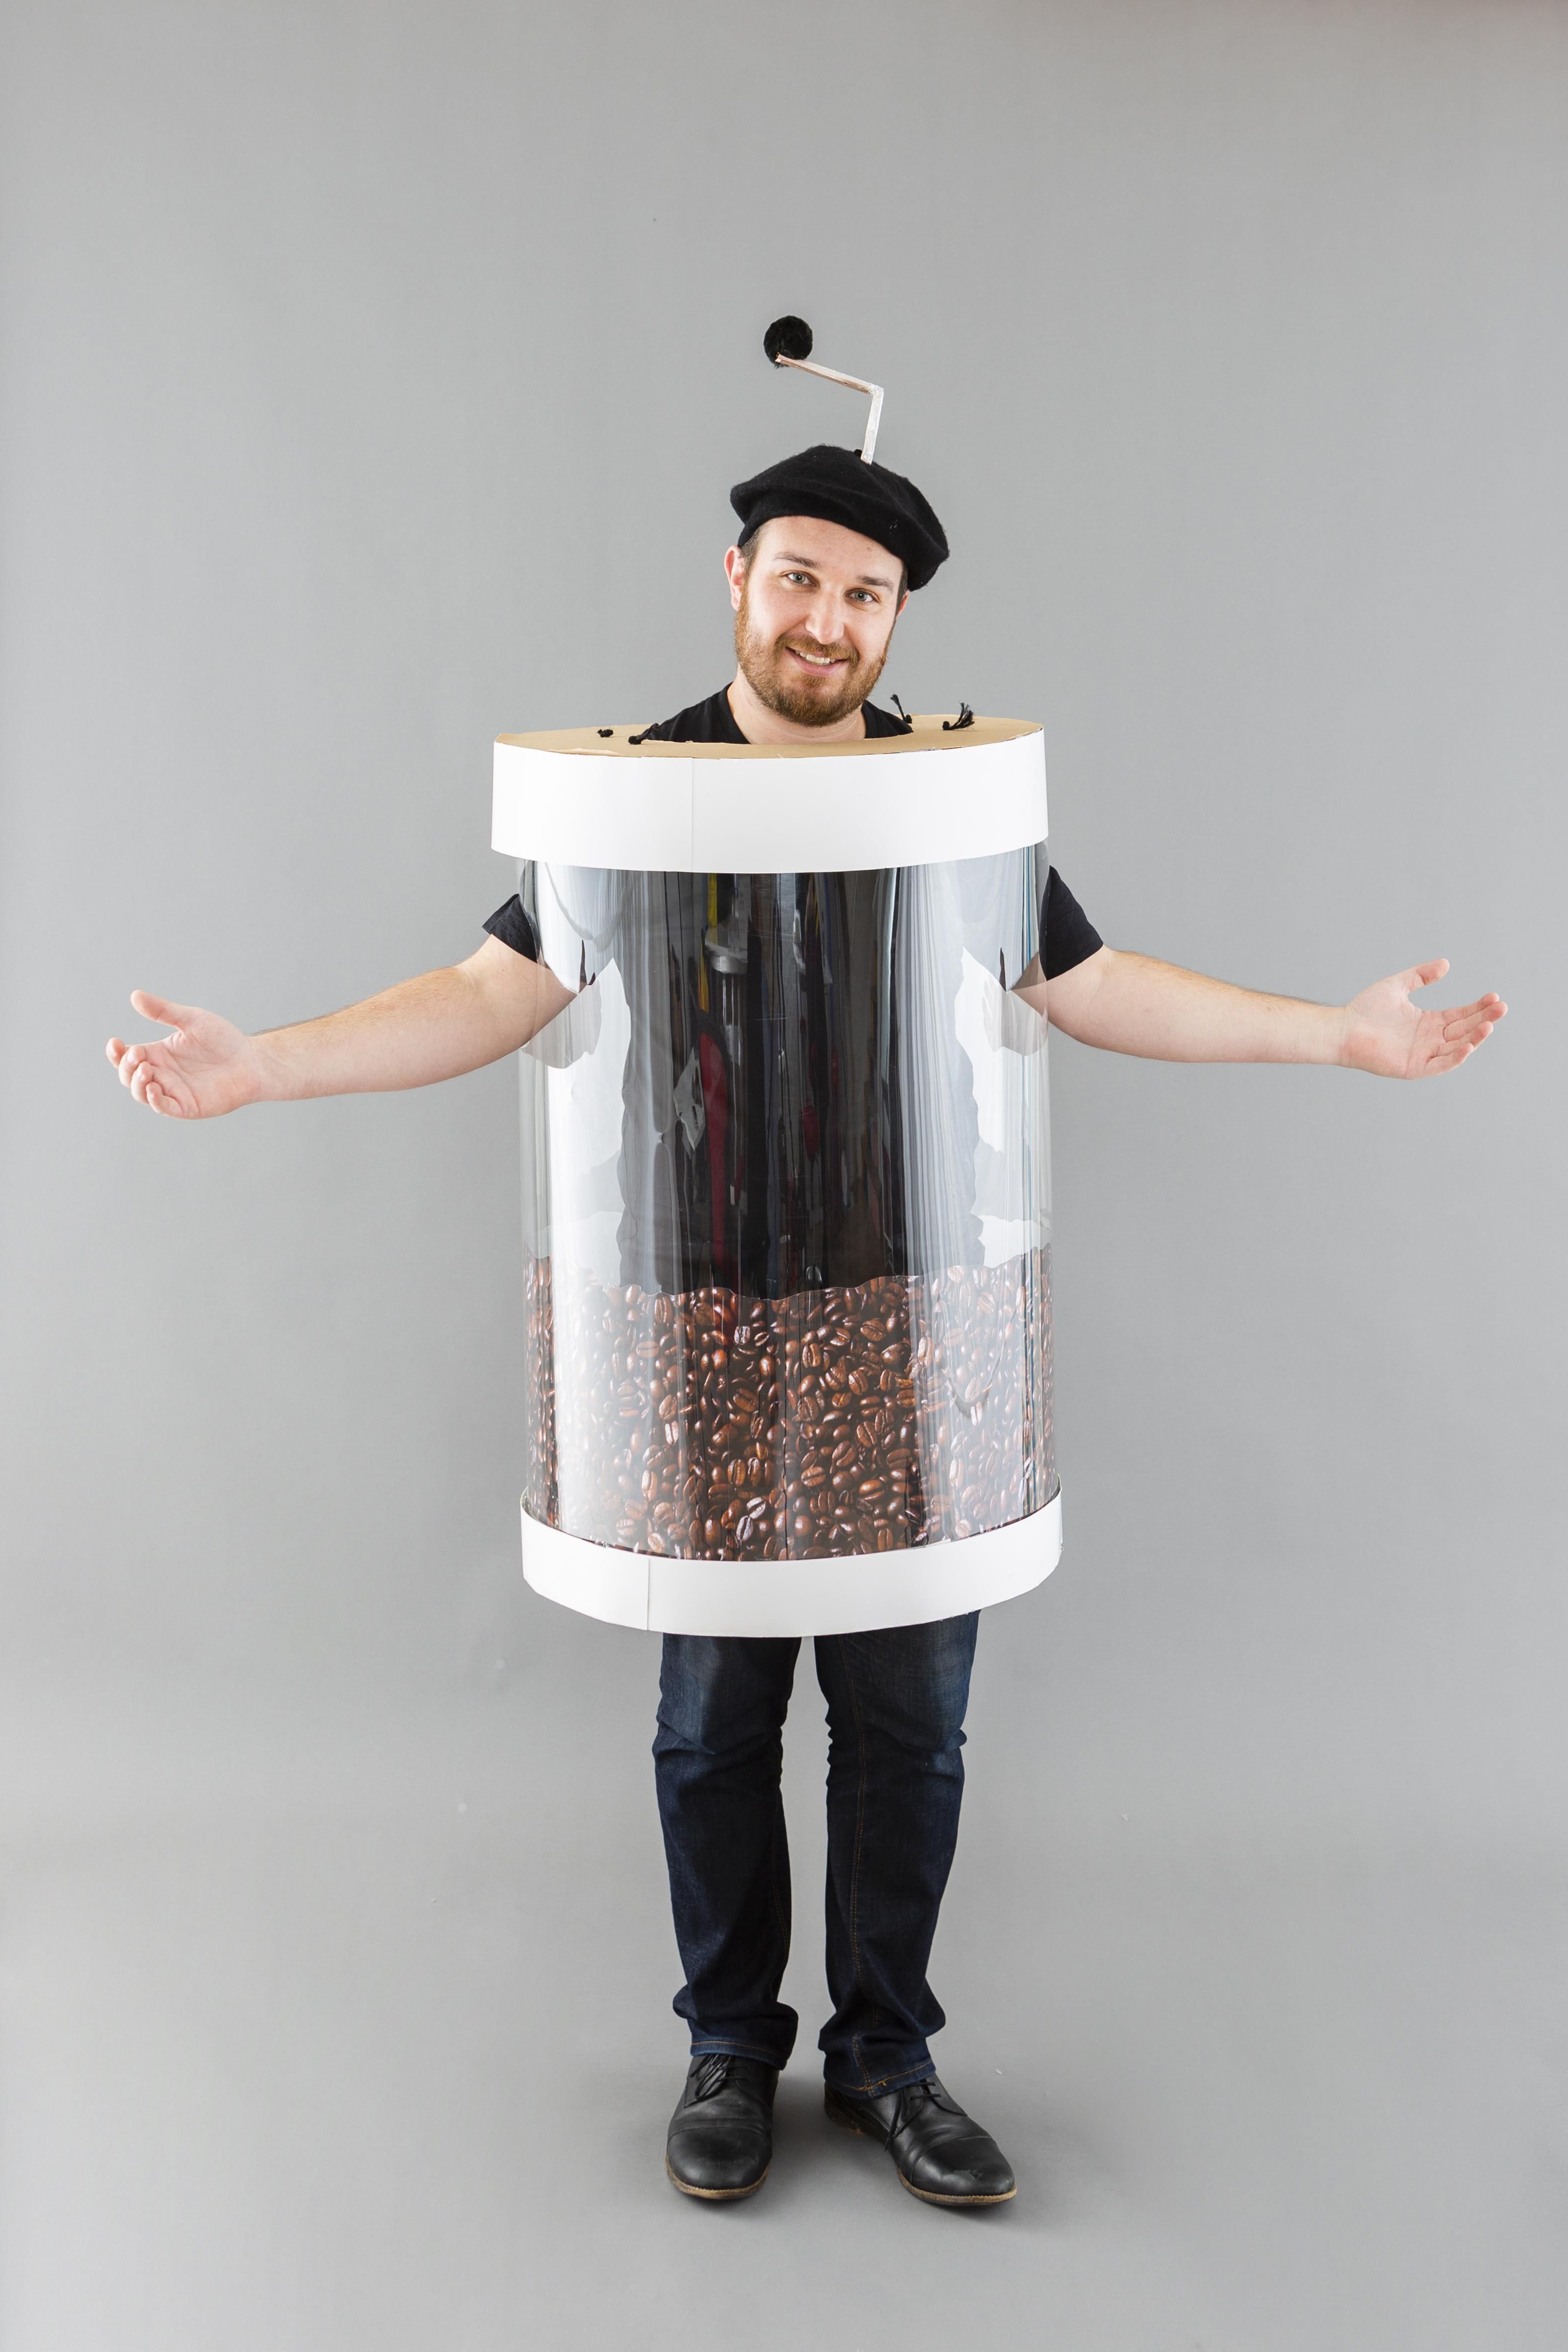 41 Halloween Costume Ideas For Guys - Brit + Co